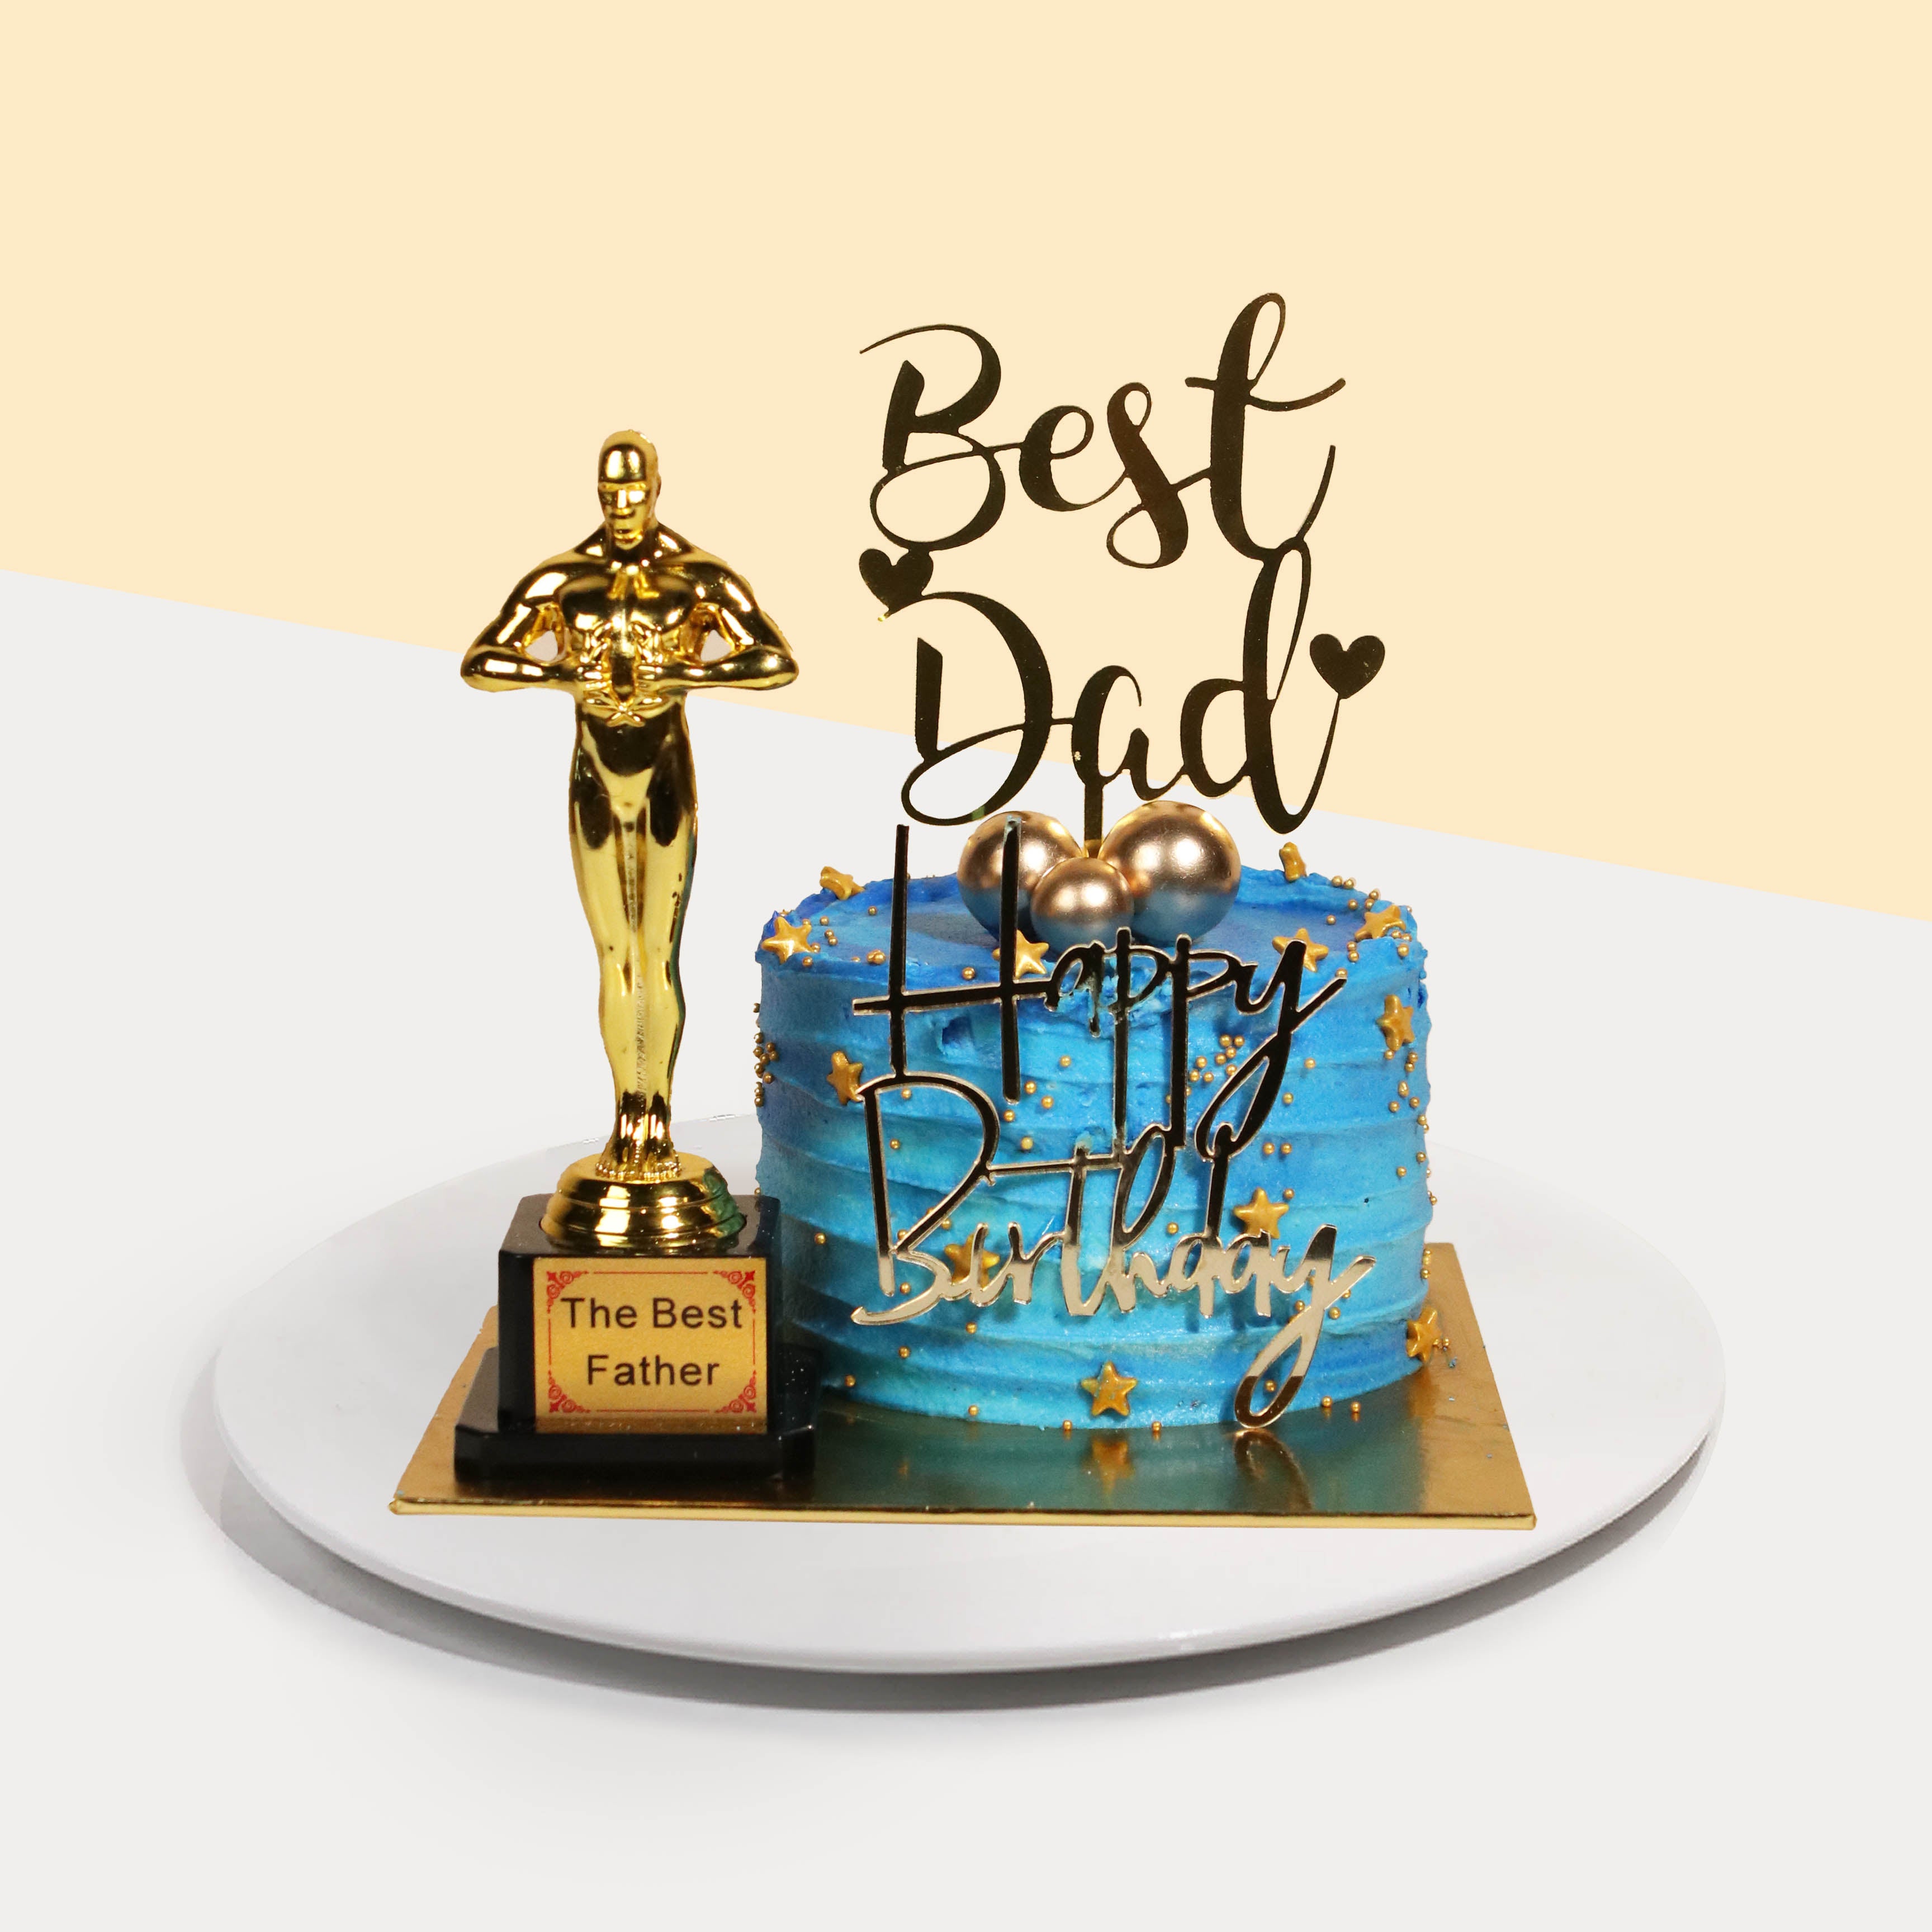 Happy birthday daddy, dad with toddler - Decorated Cake - CakesDecor